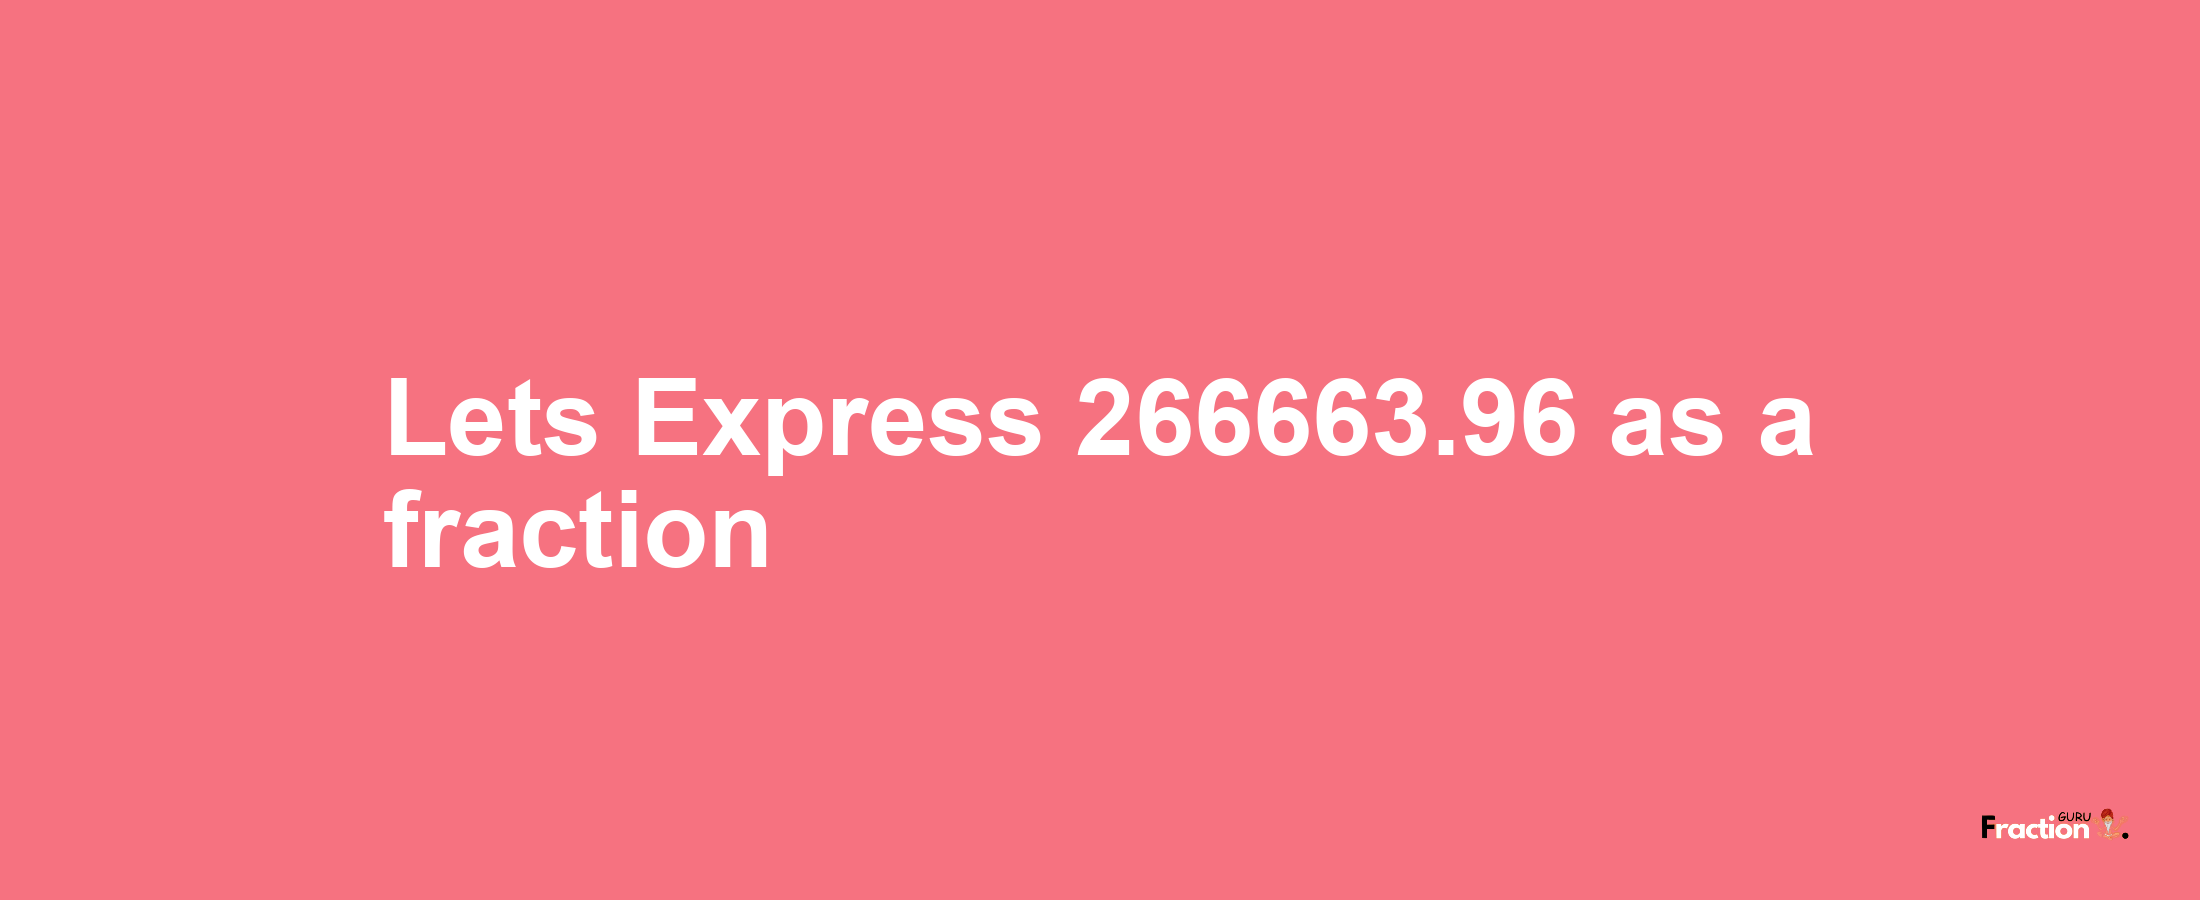 Lets Express 266663.96 as afraction